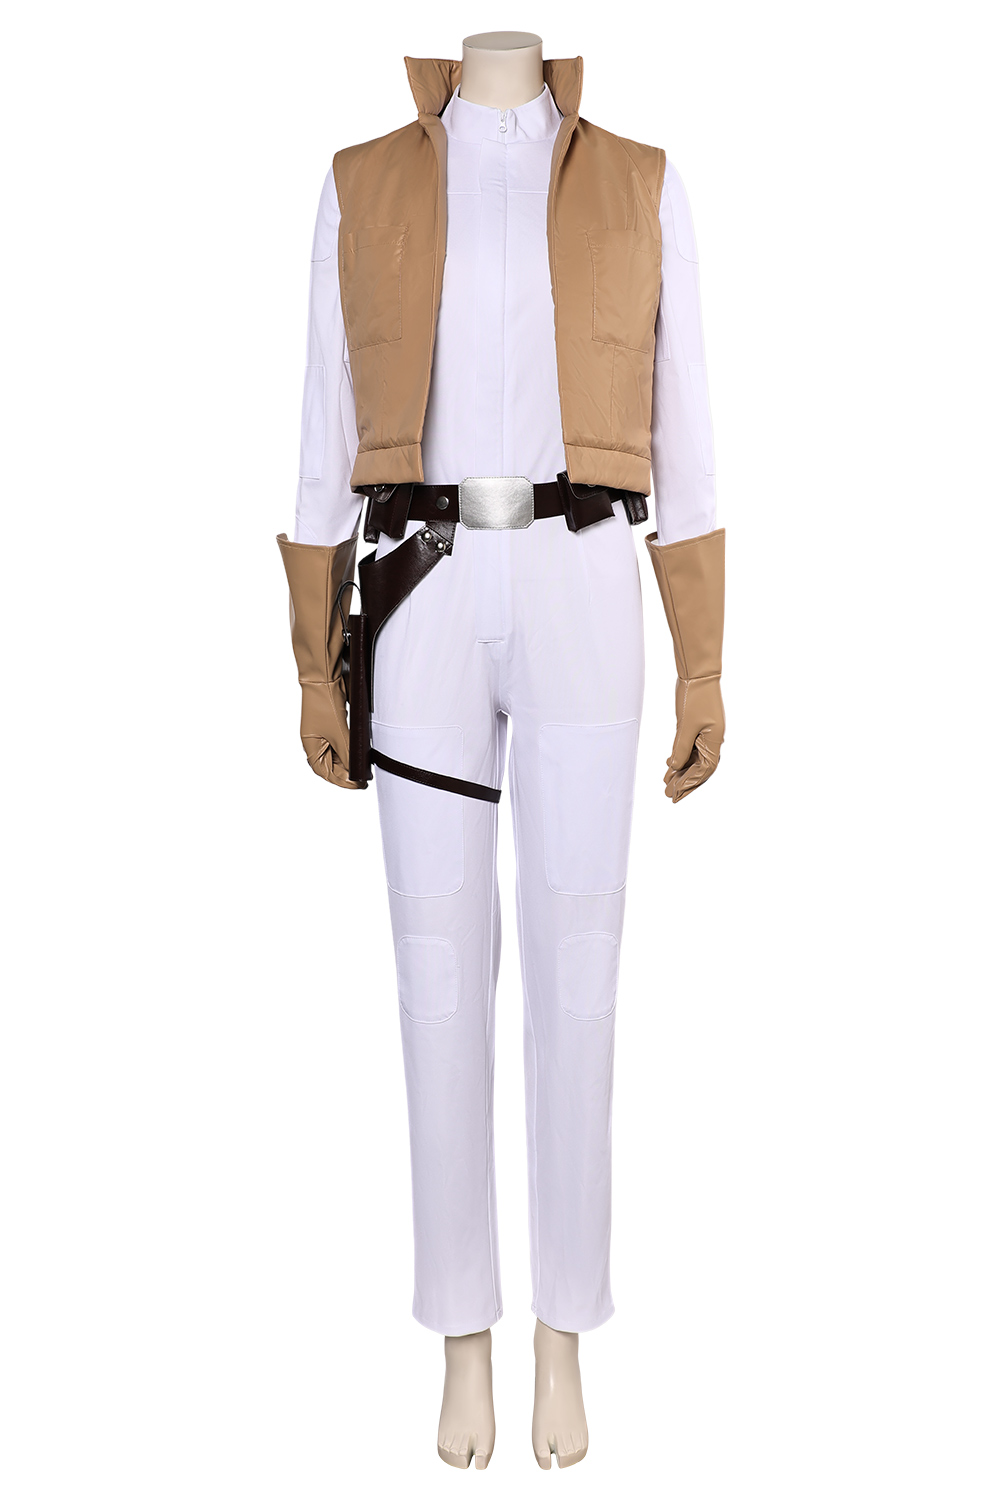 Movie SW Princess Leia Organa Slo Women White Jumpsuit Full Set Outfits Halloween Carnival Suit Cosplay Costume